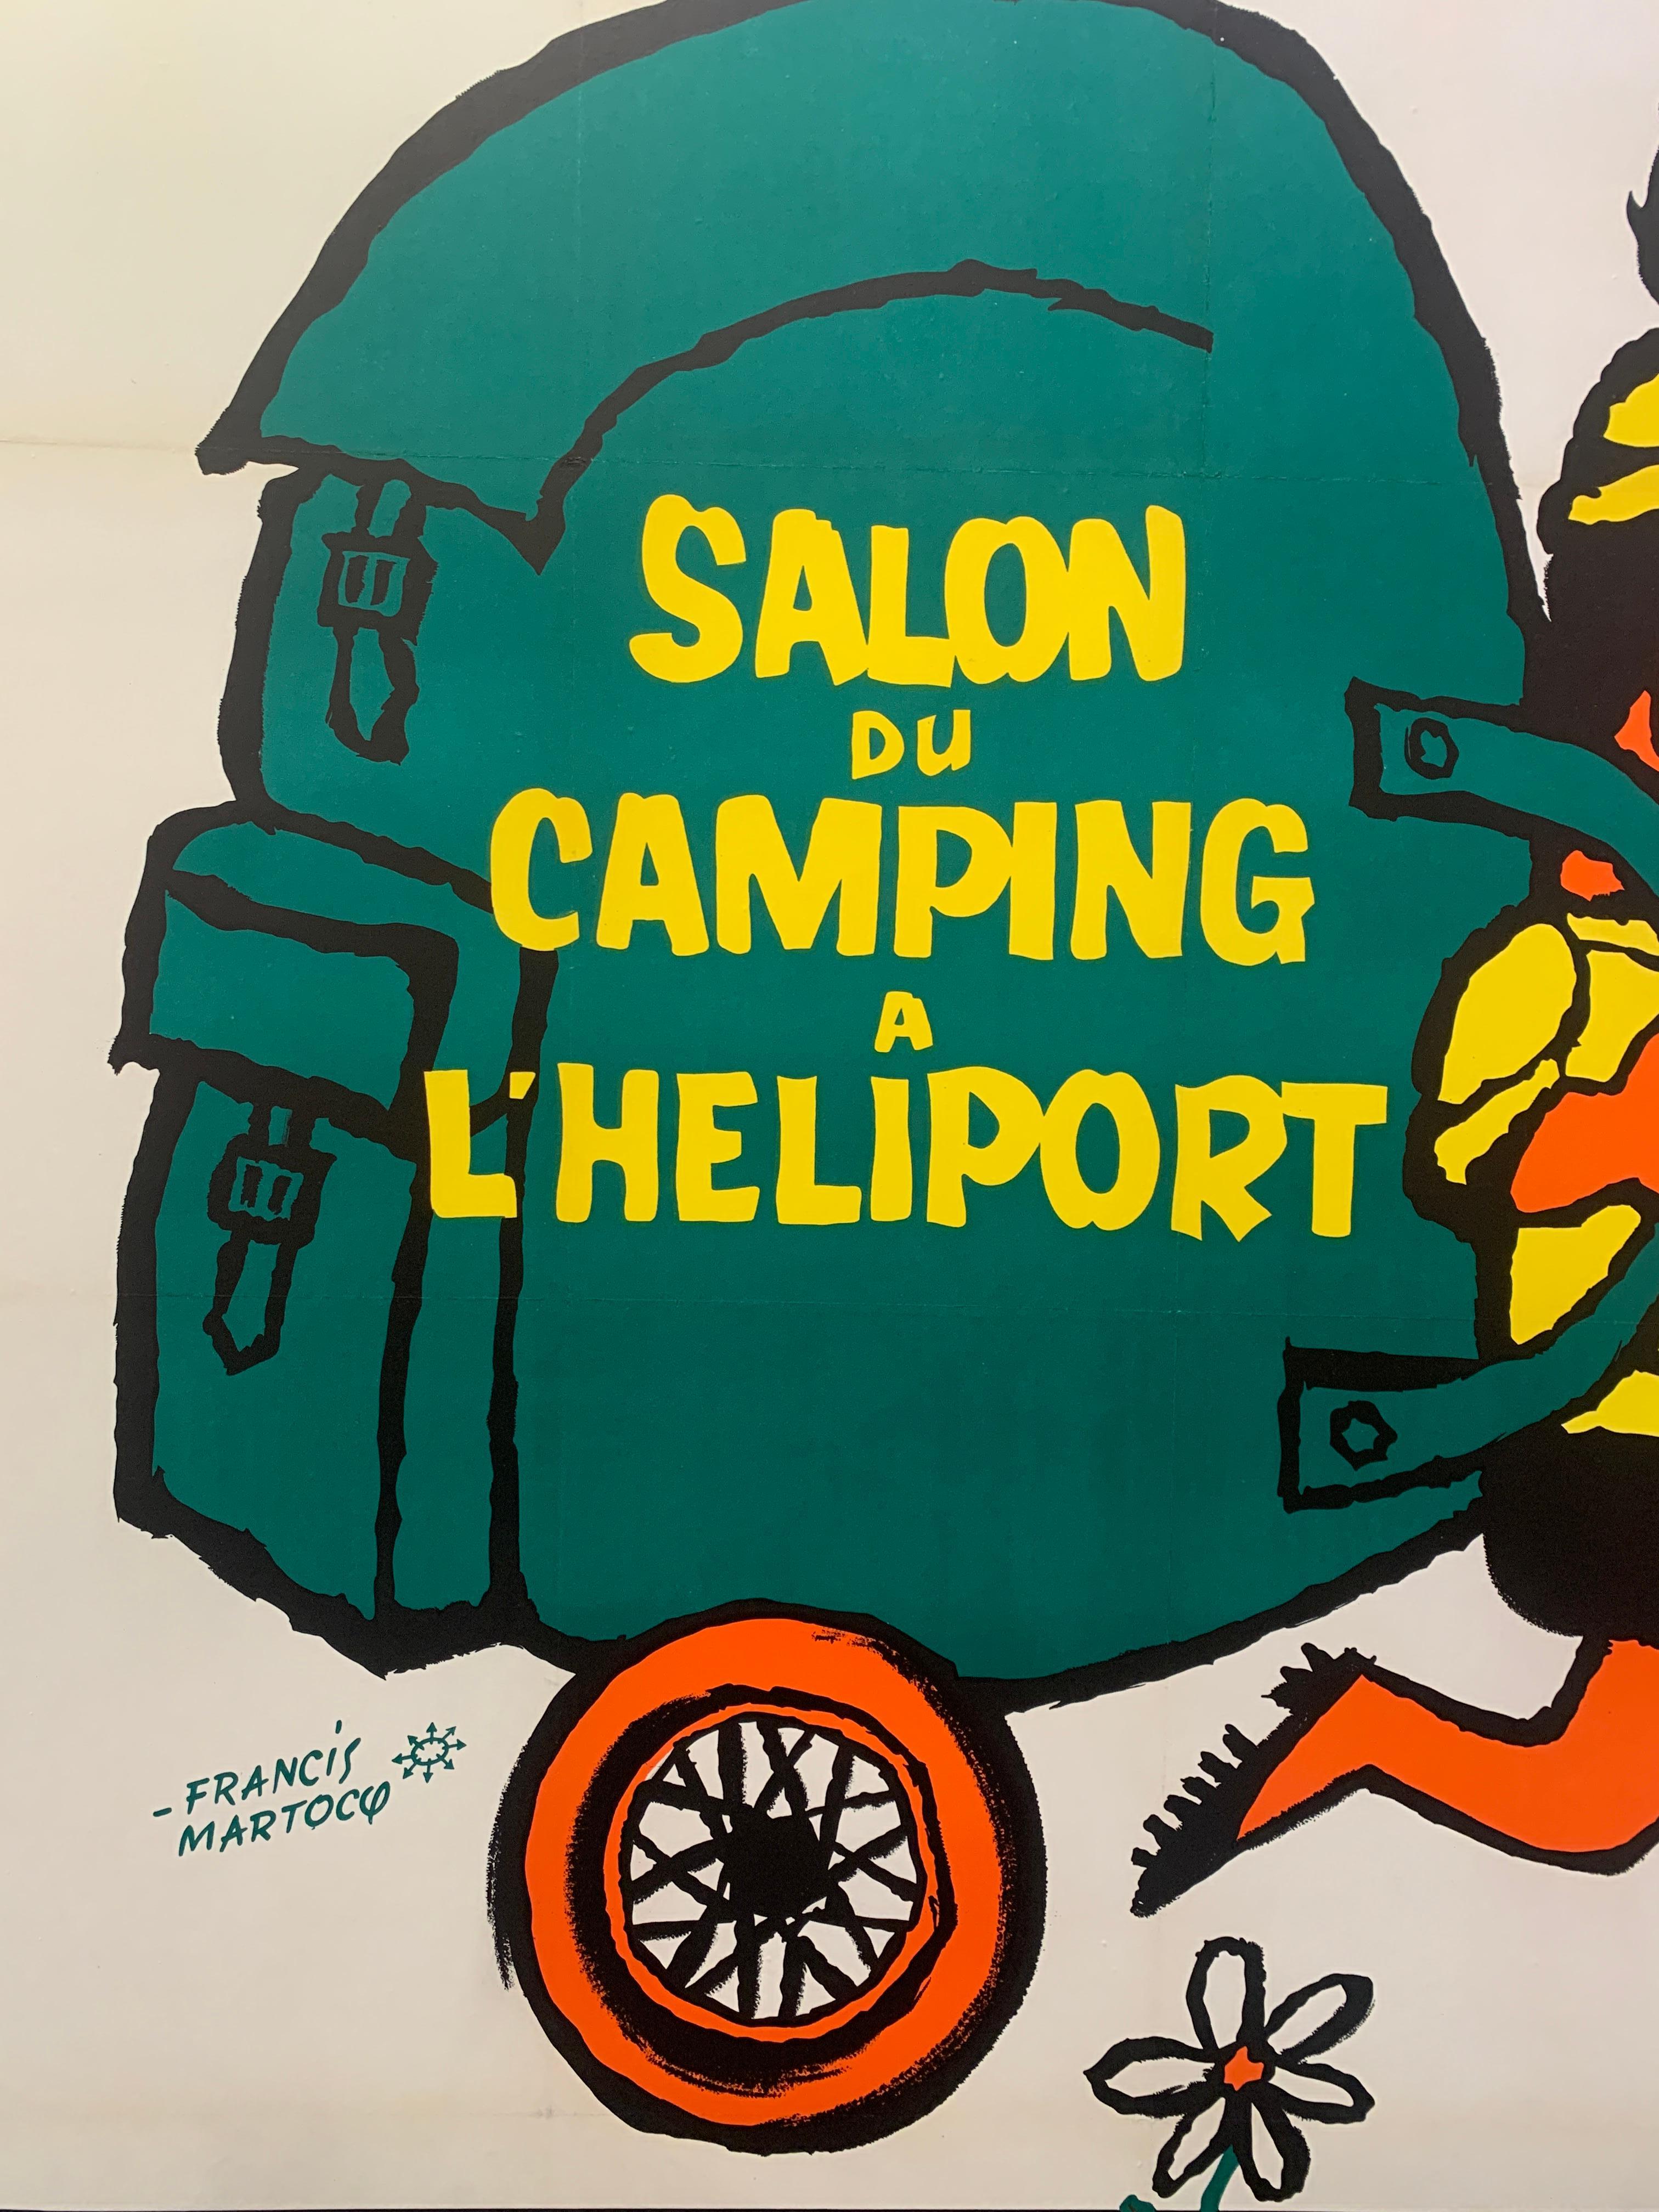 Modern Original Vintage French Camping Poster, c. 1950 by Francis Martocq For Sale